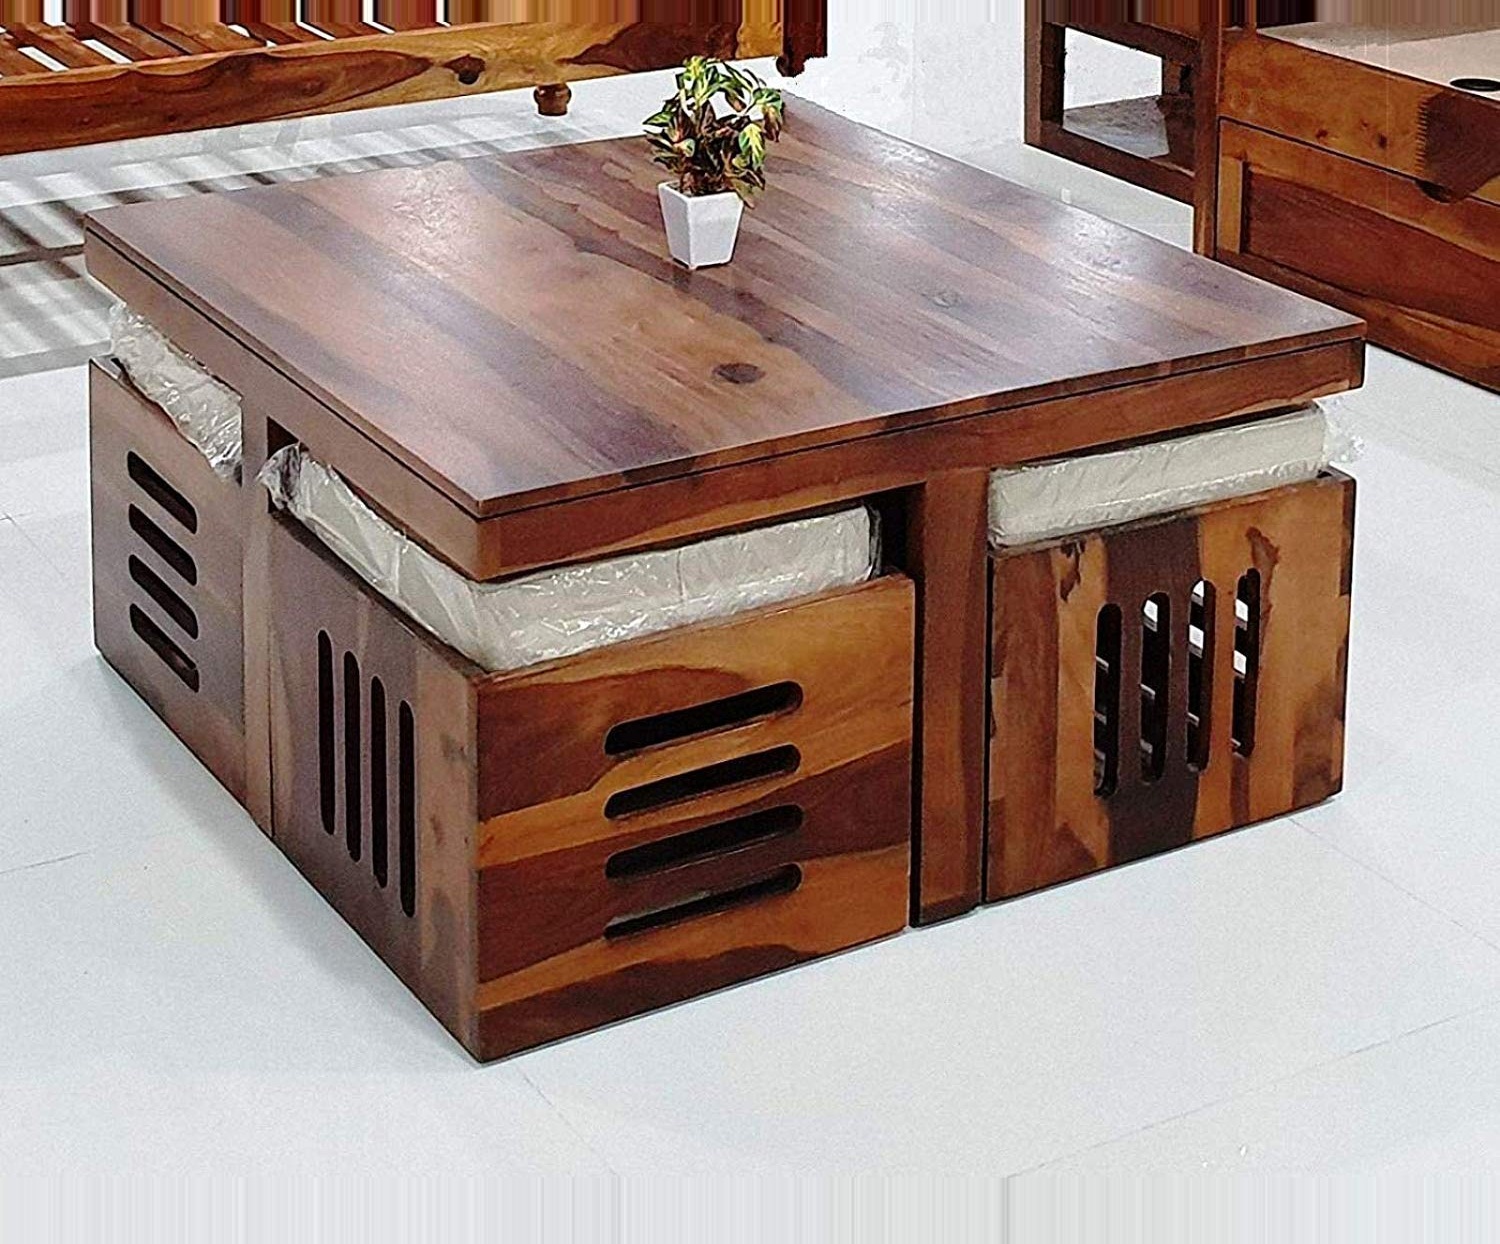 Furnisquare Wooden Coffee Table Set in Natural Finish